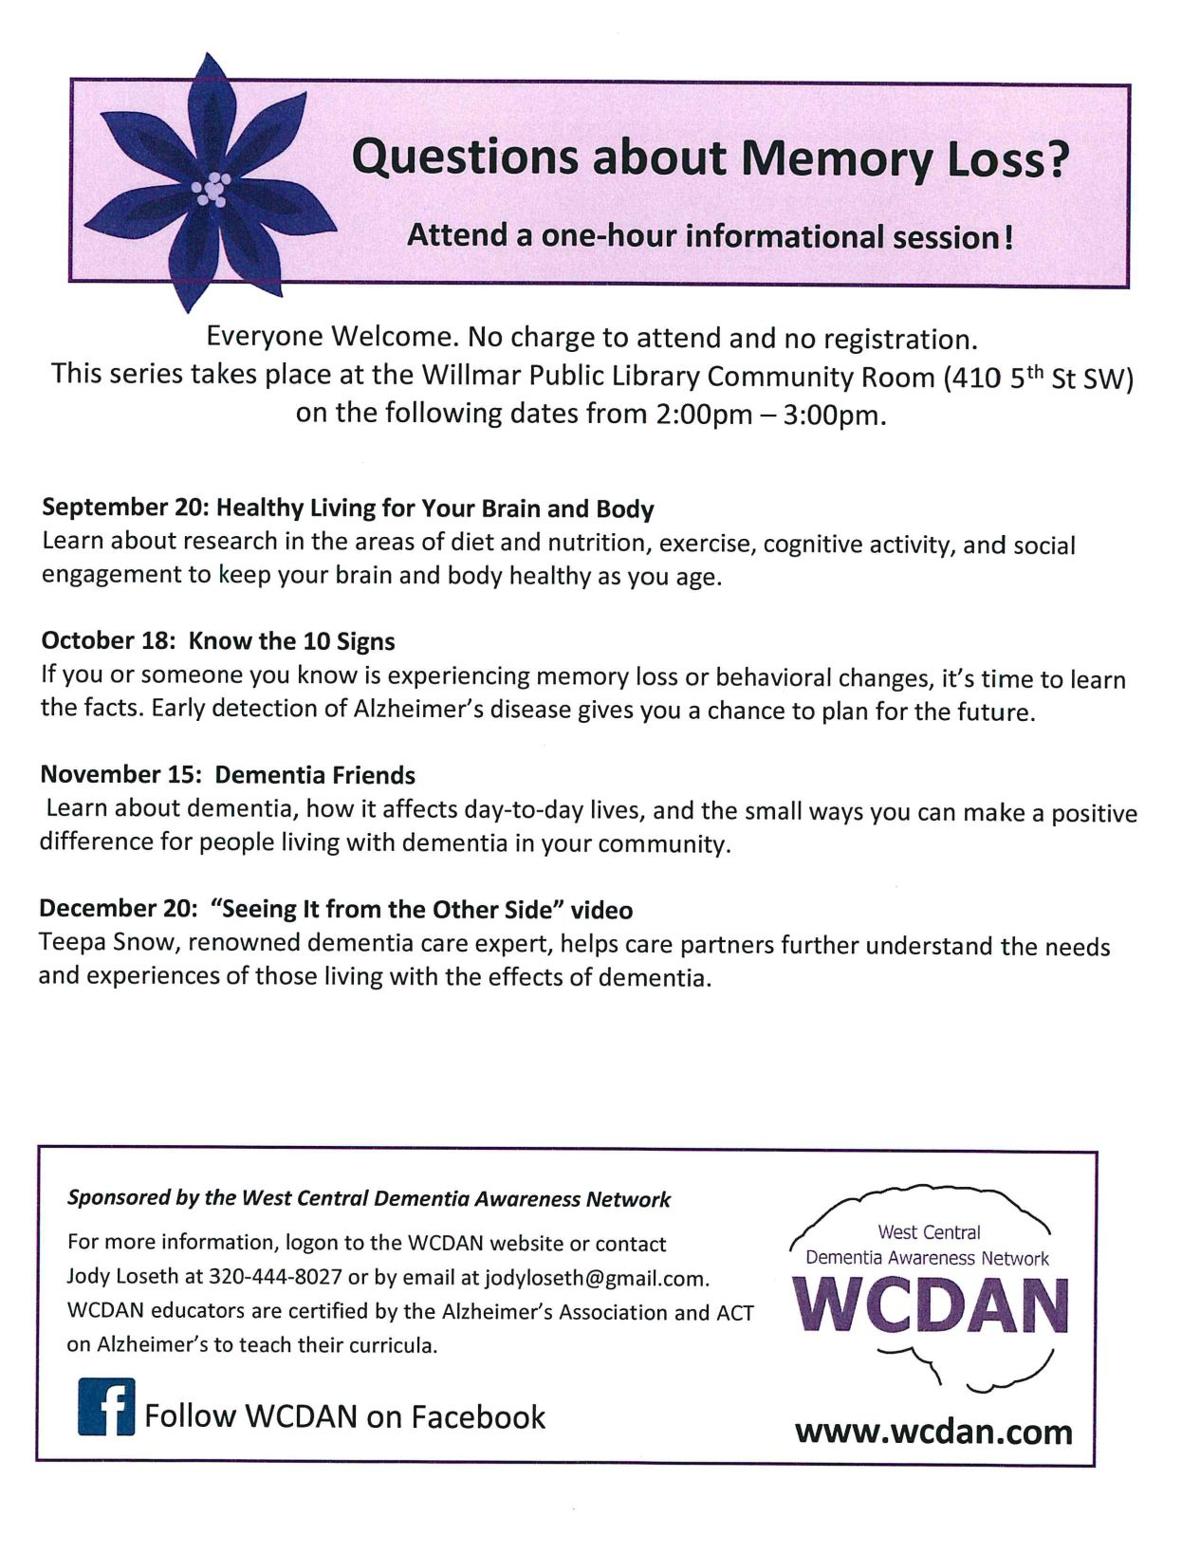 "Questions about Memory Loss?" Sessions Calendar